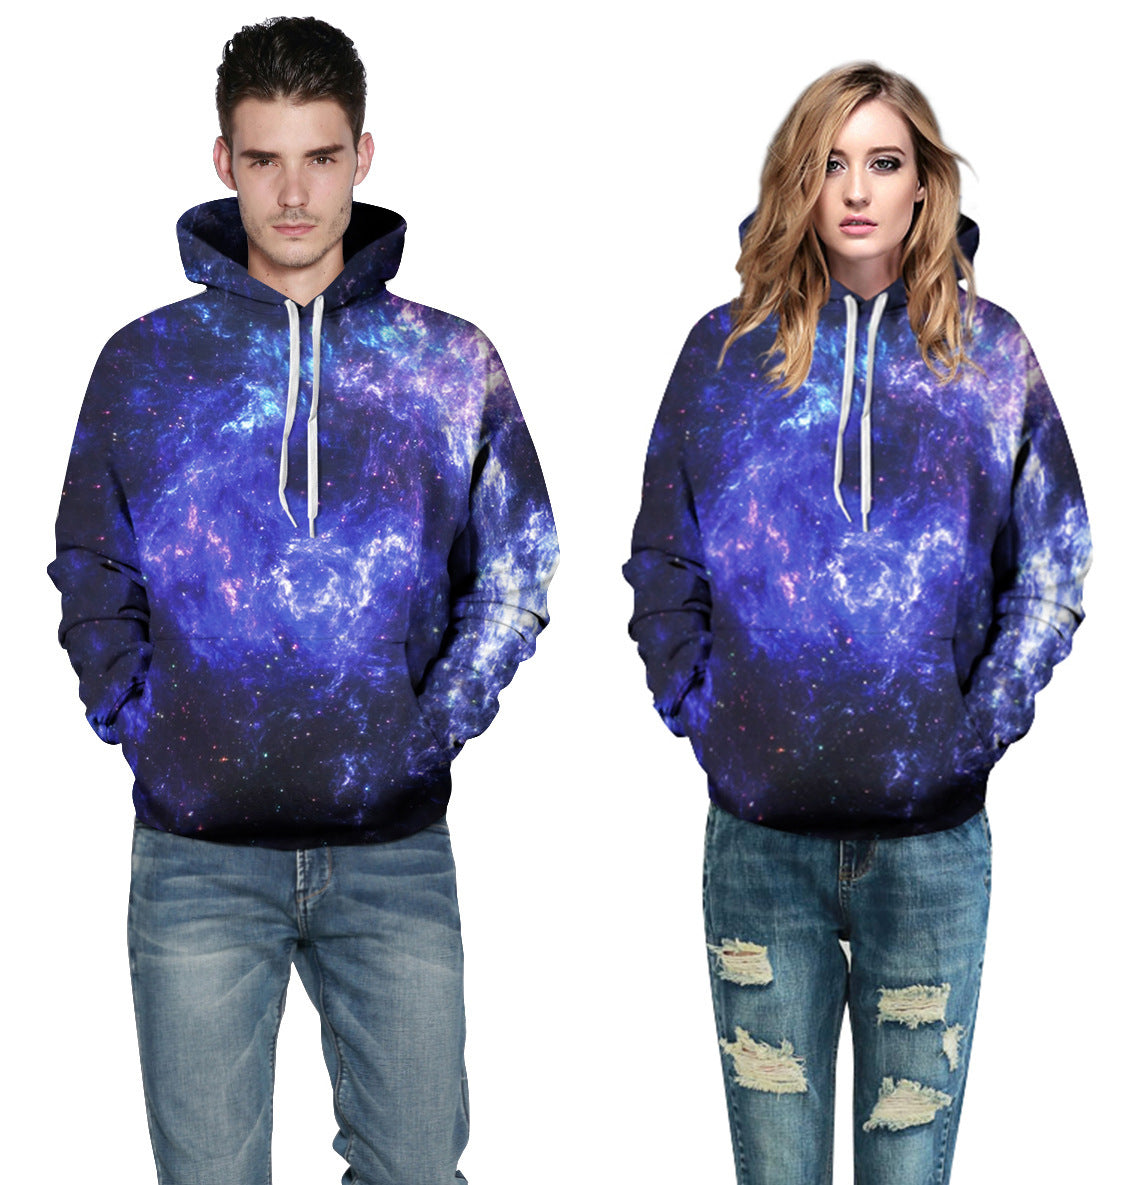 3d Psychedelic Hoodies Trippy Graffiti Printed Hoodie Sweaters Color Painting Hooded Men Women Plus Size Sweat Outerwear